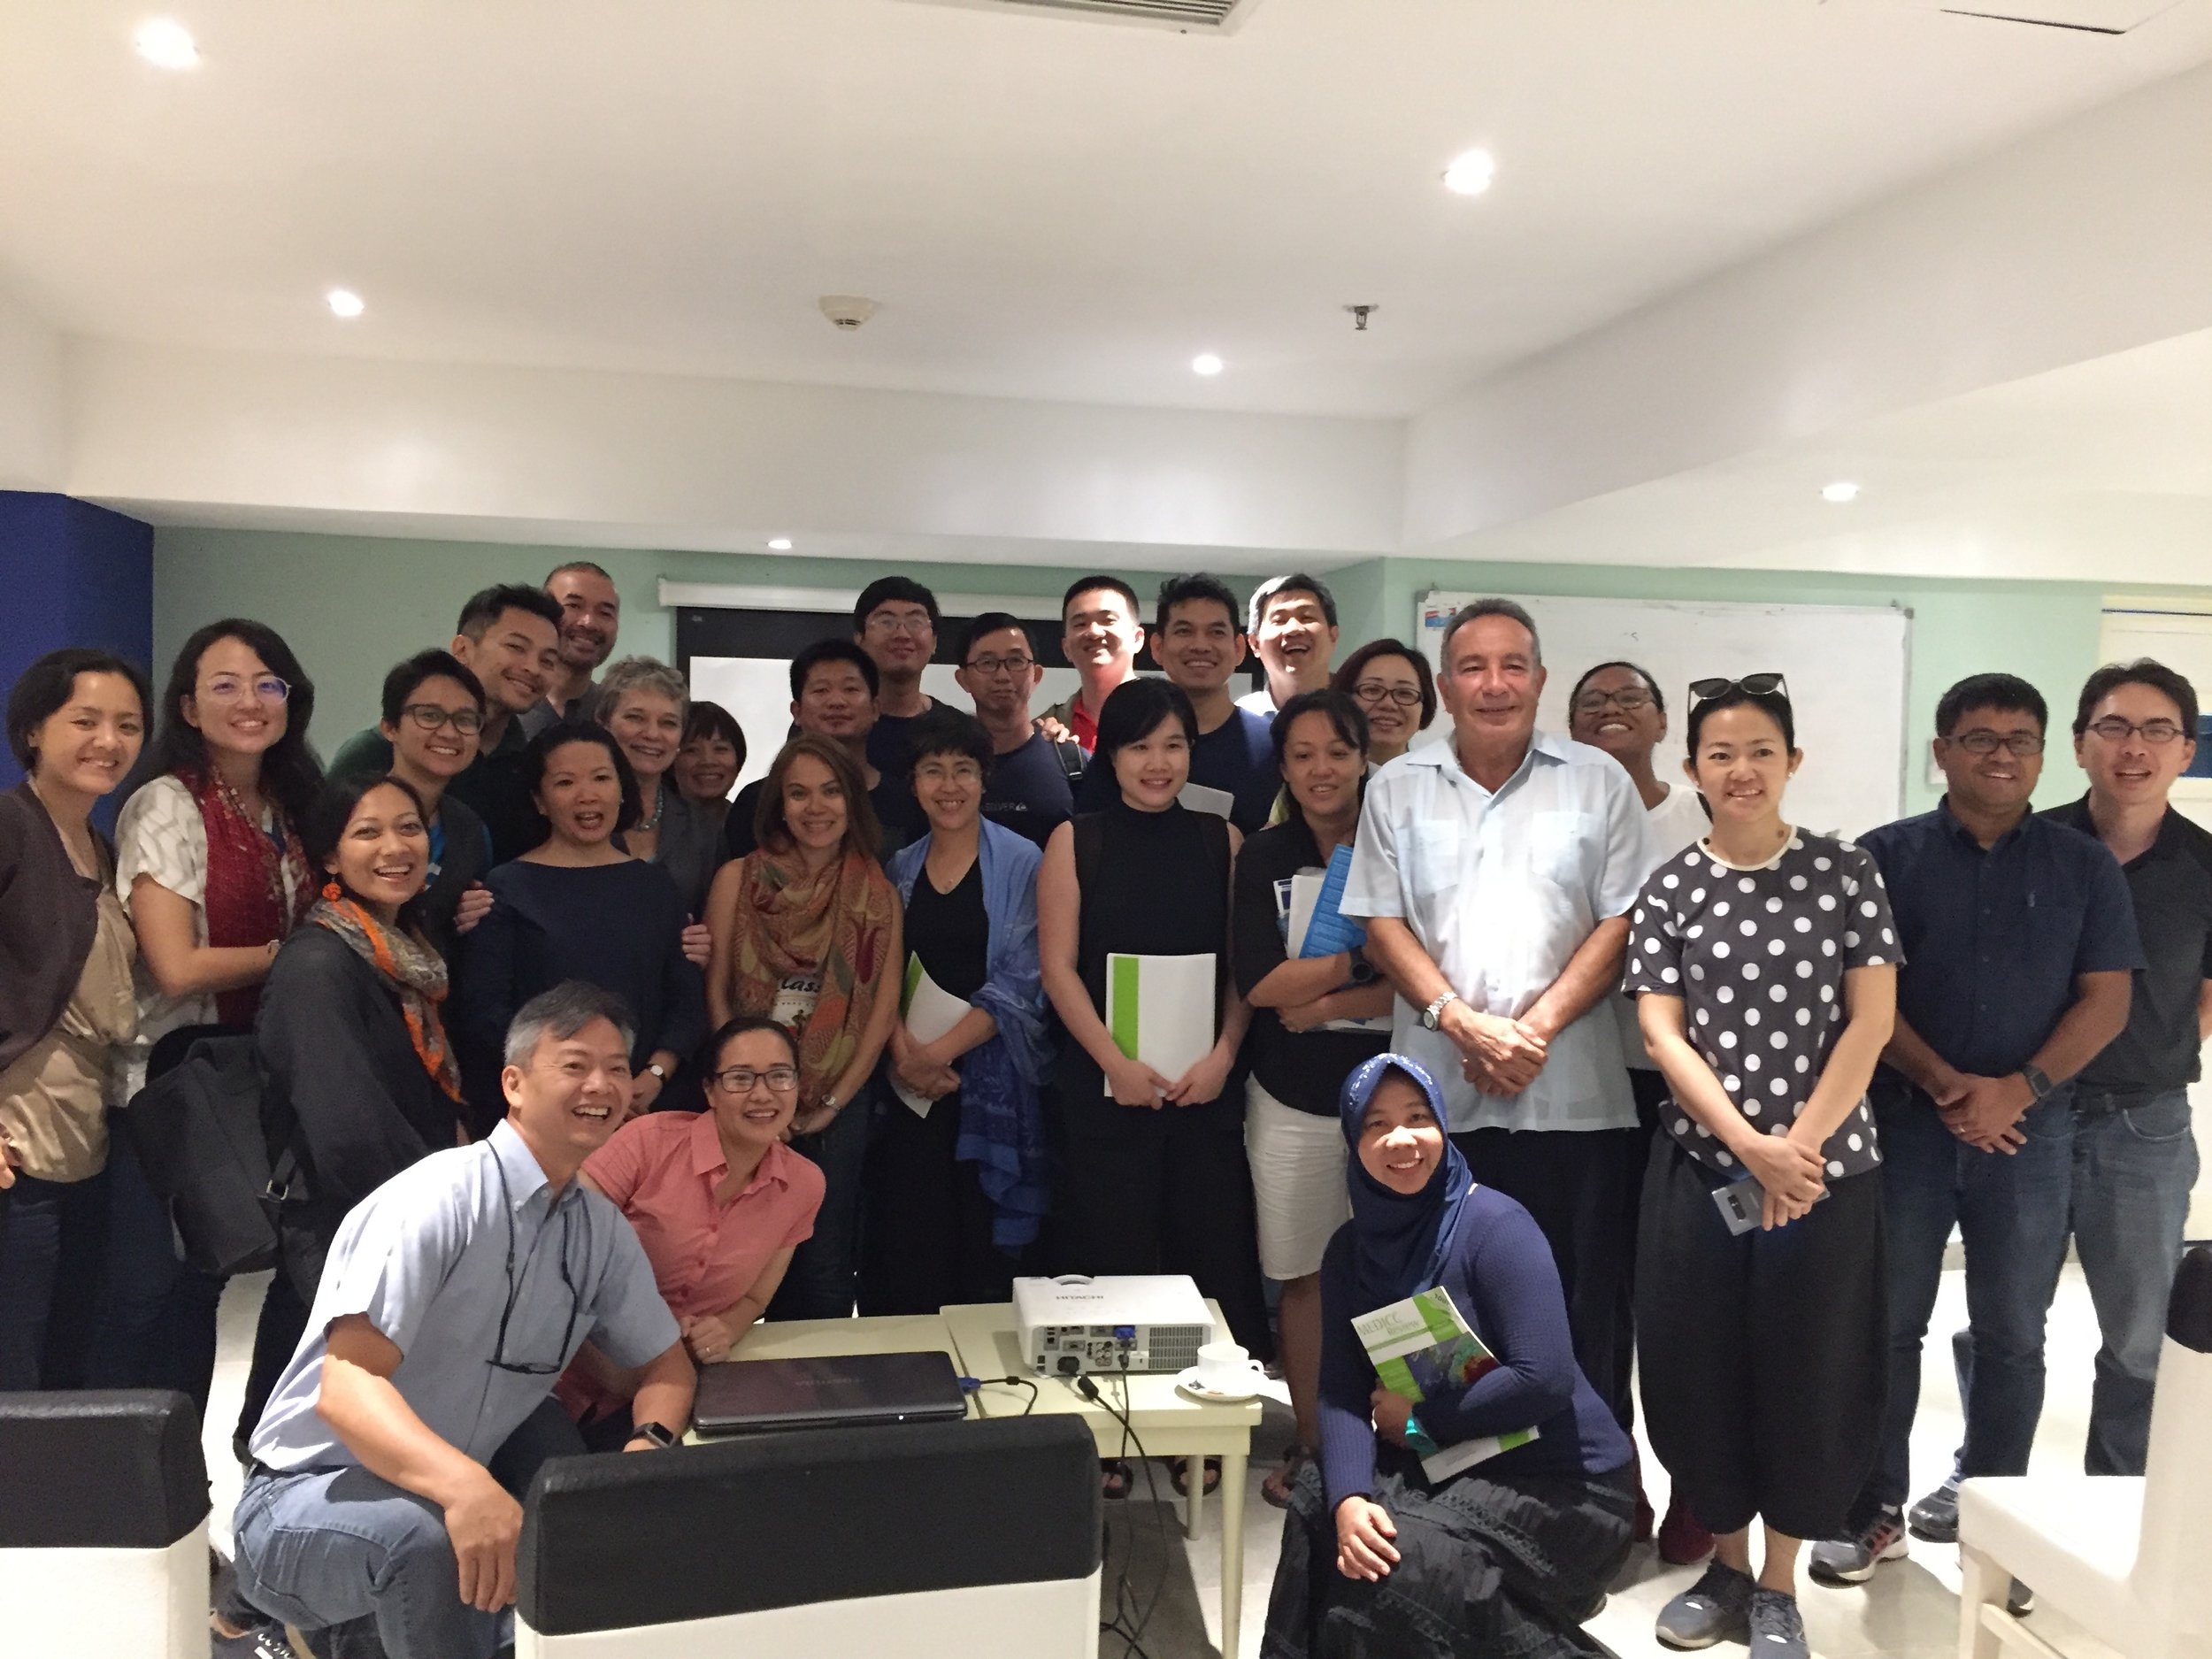 May/June 2018: Equity Initiative for Southeast Asia and China Global Learning Tour in Cuba